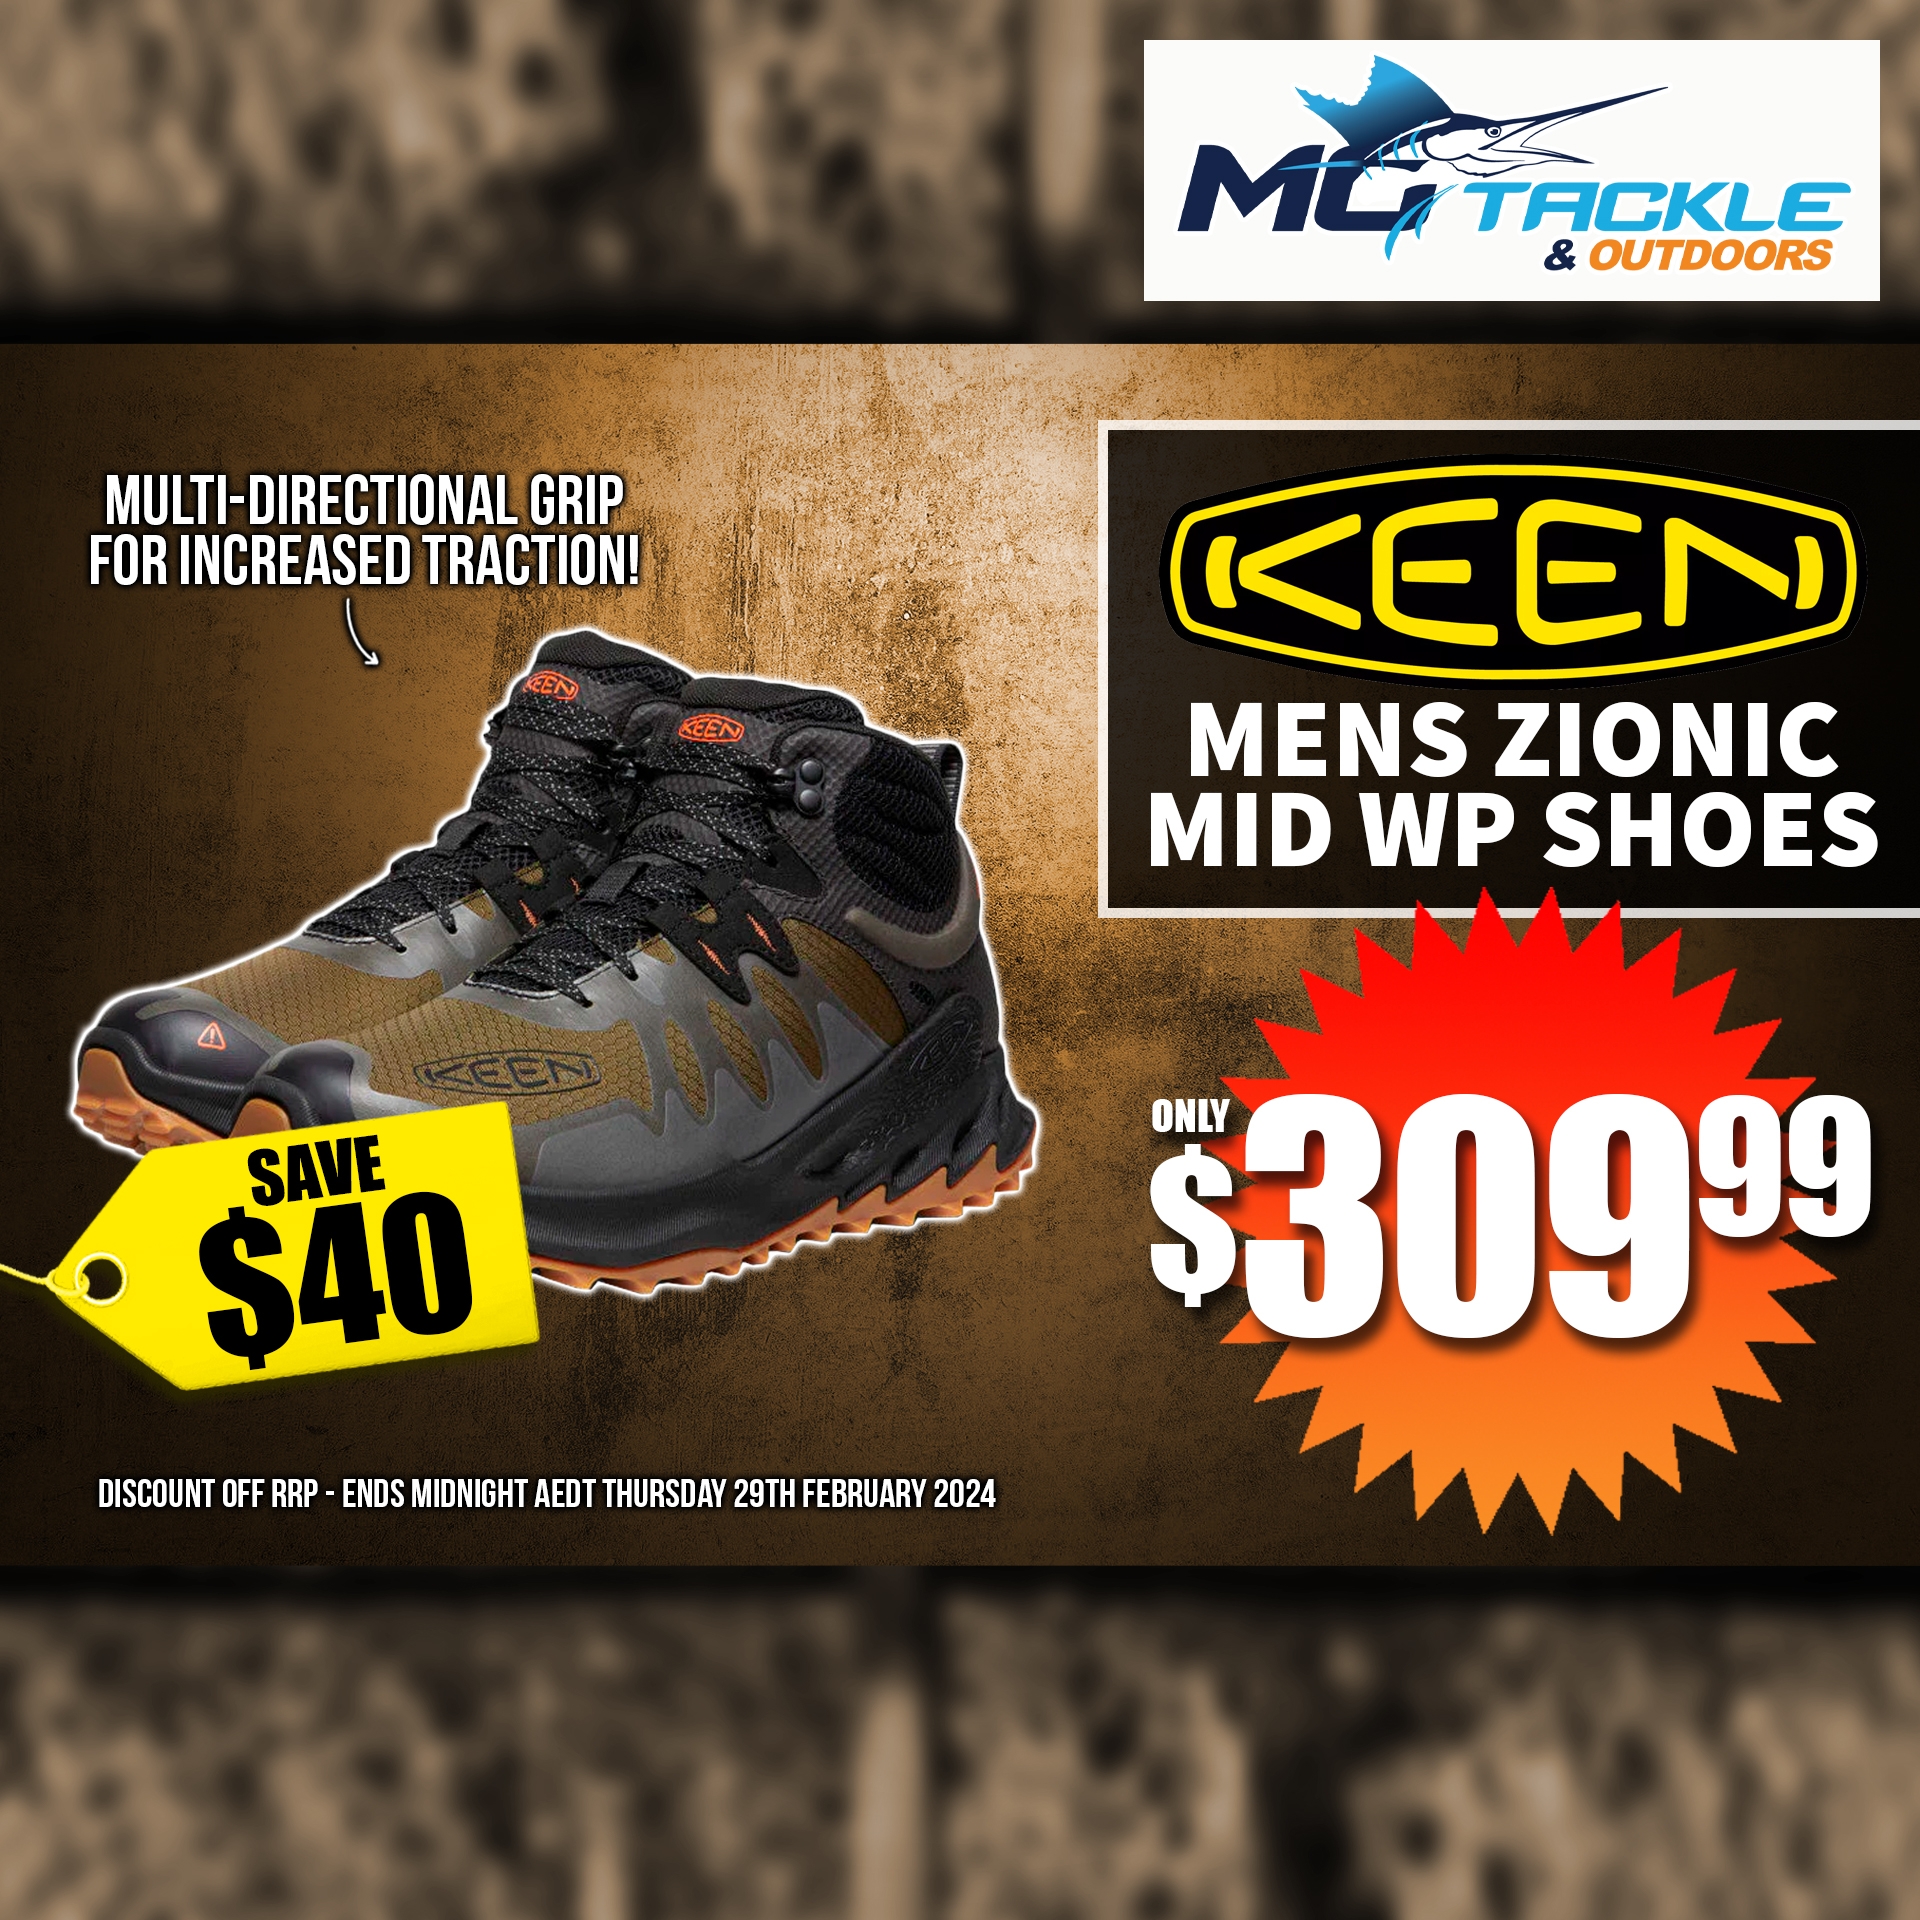 KEEN MENS ZIONIC MID WP SHOES only $309.99